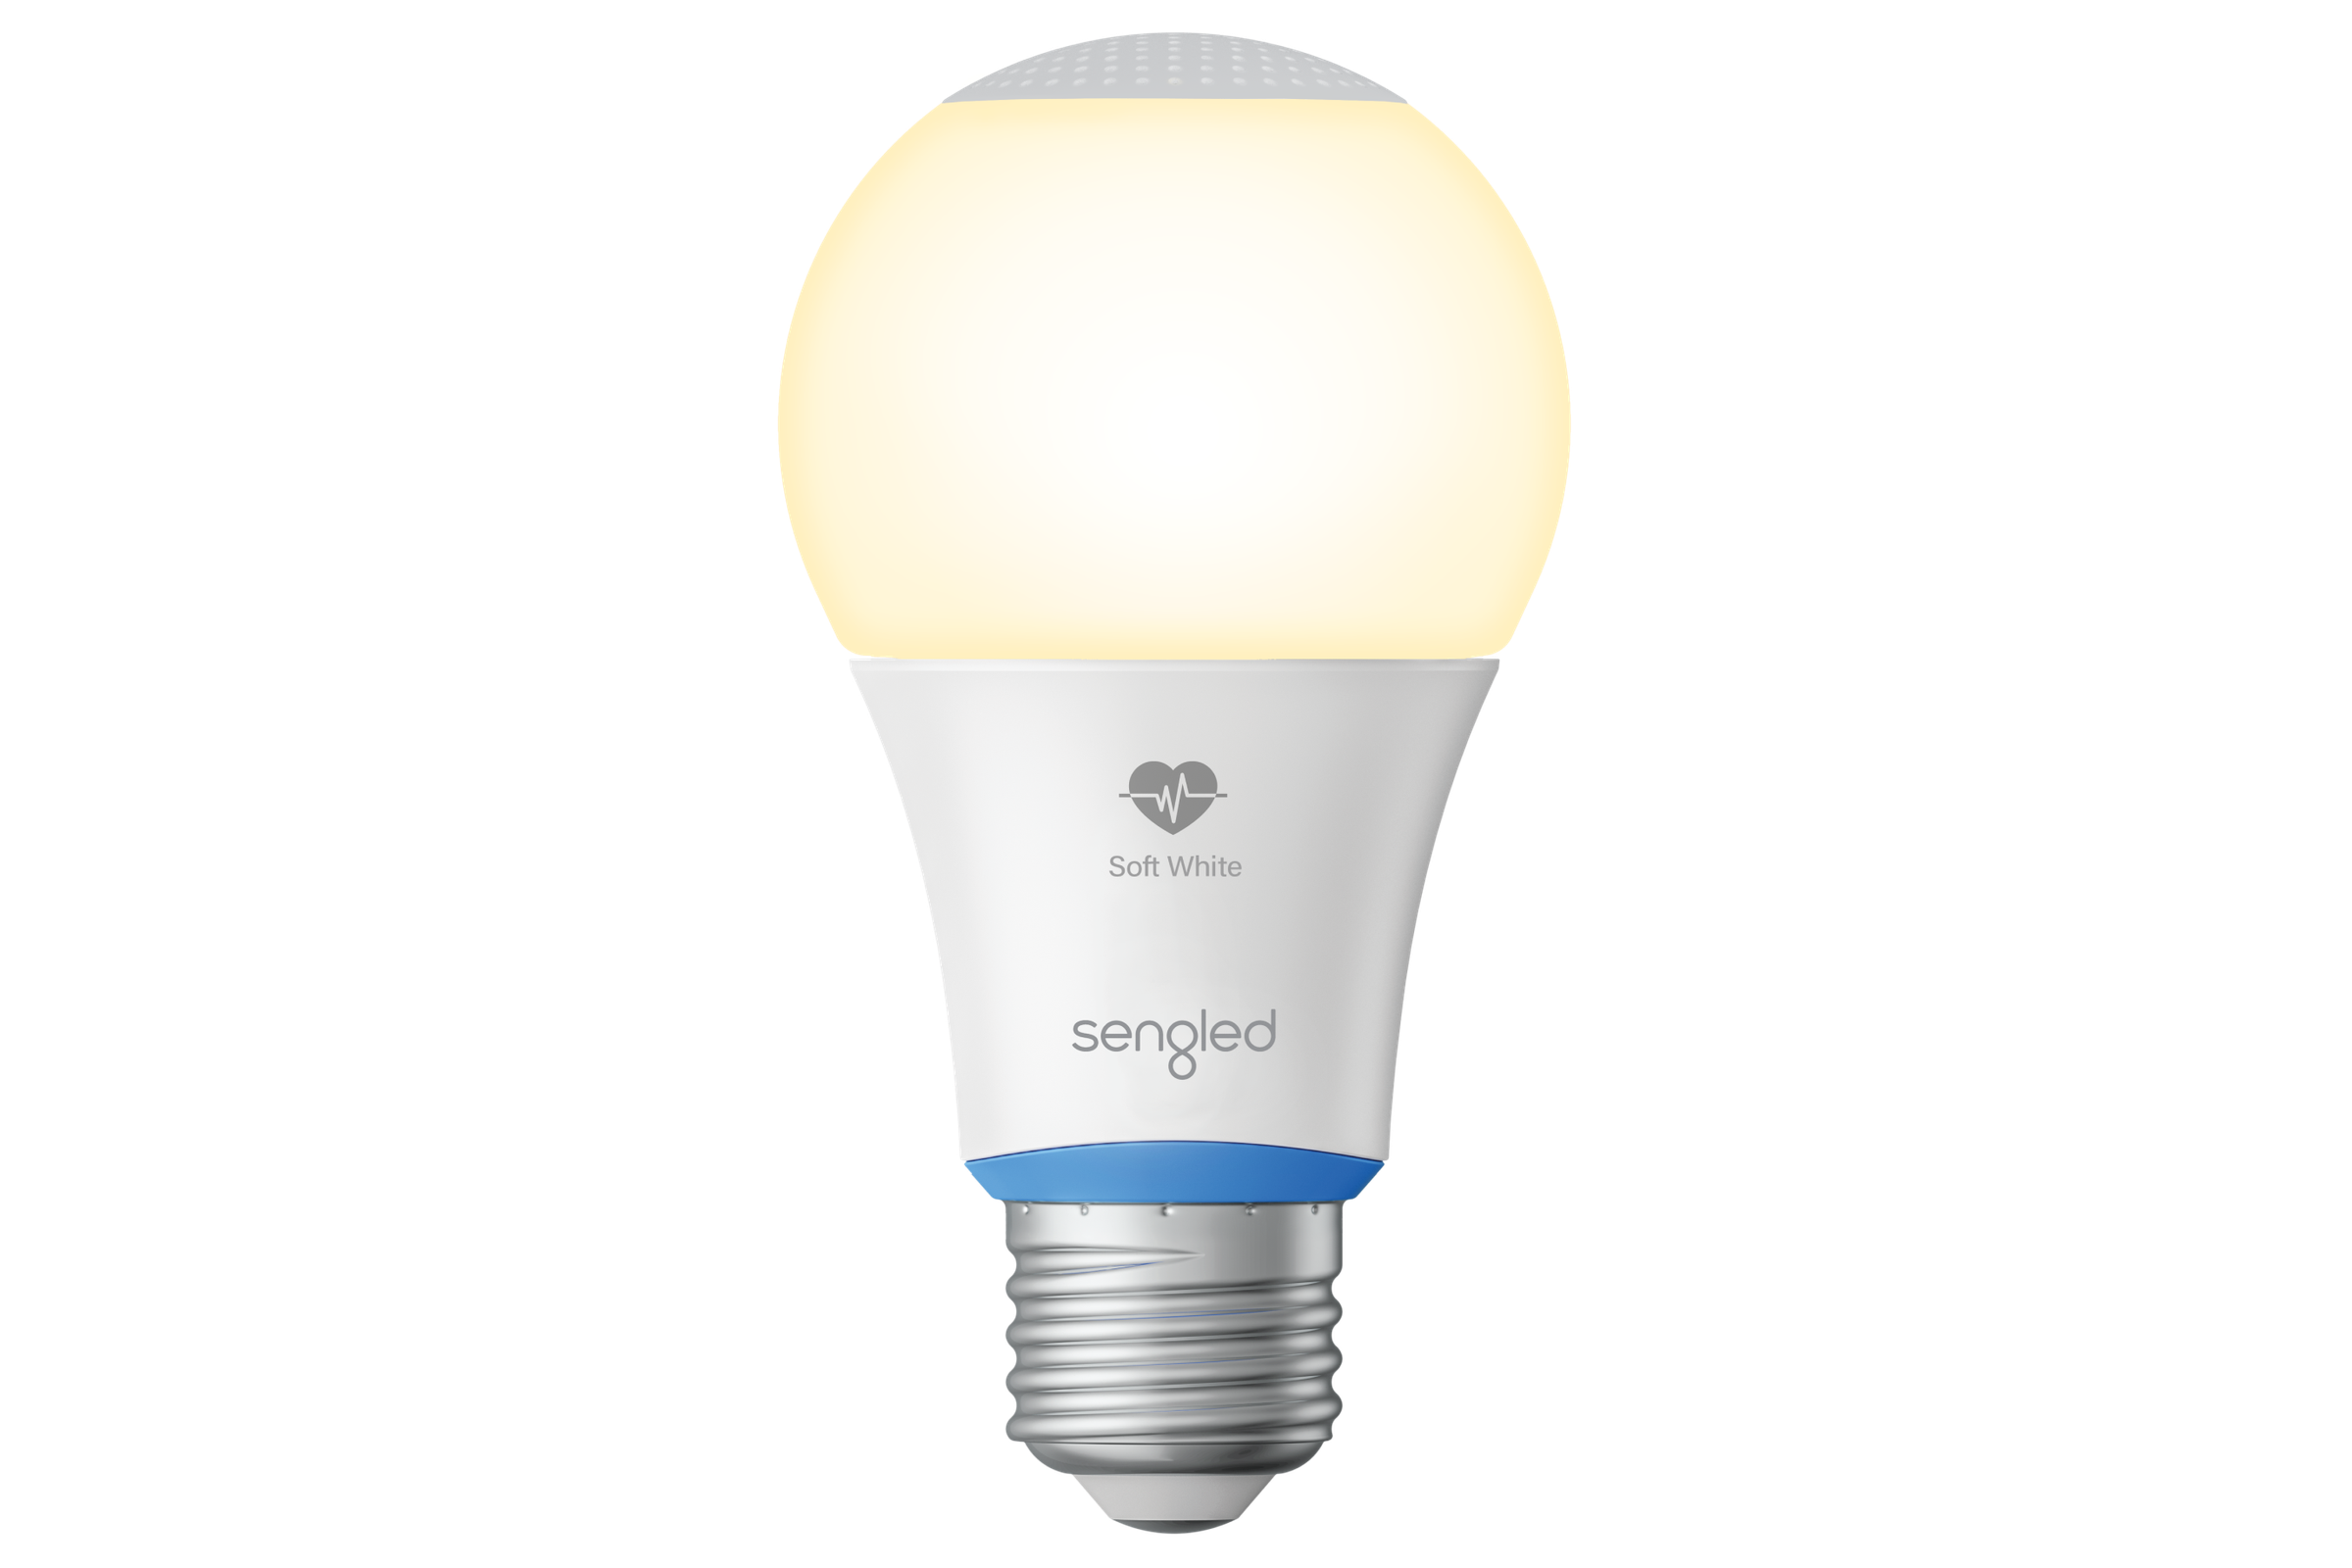 Sengled’s smart bulb can track your sleep and your heart rate.